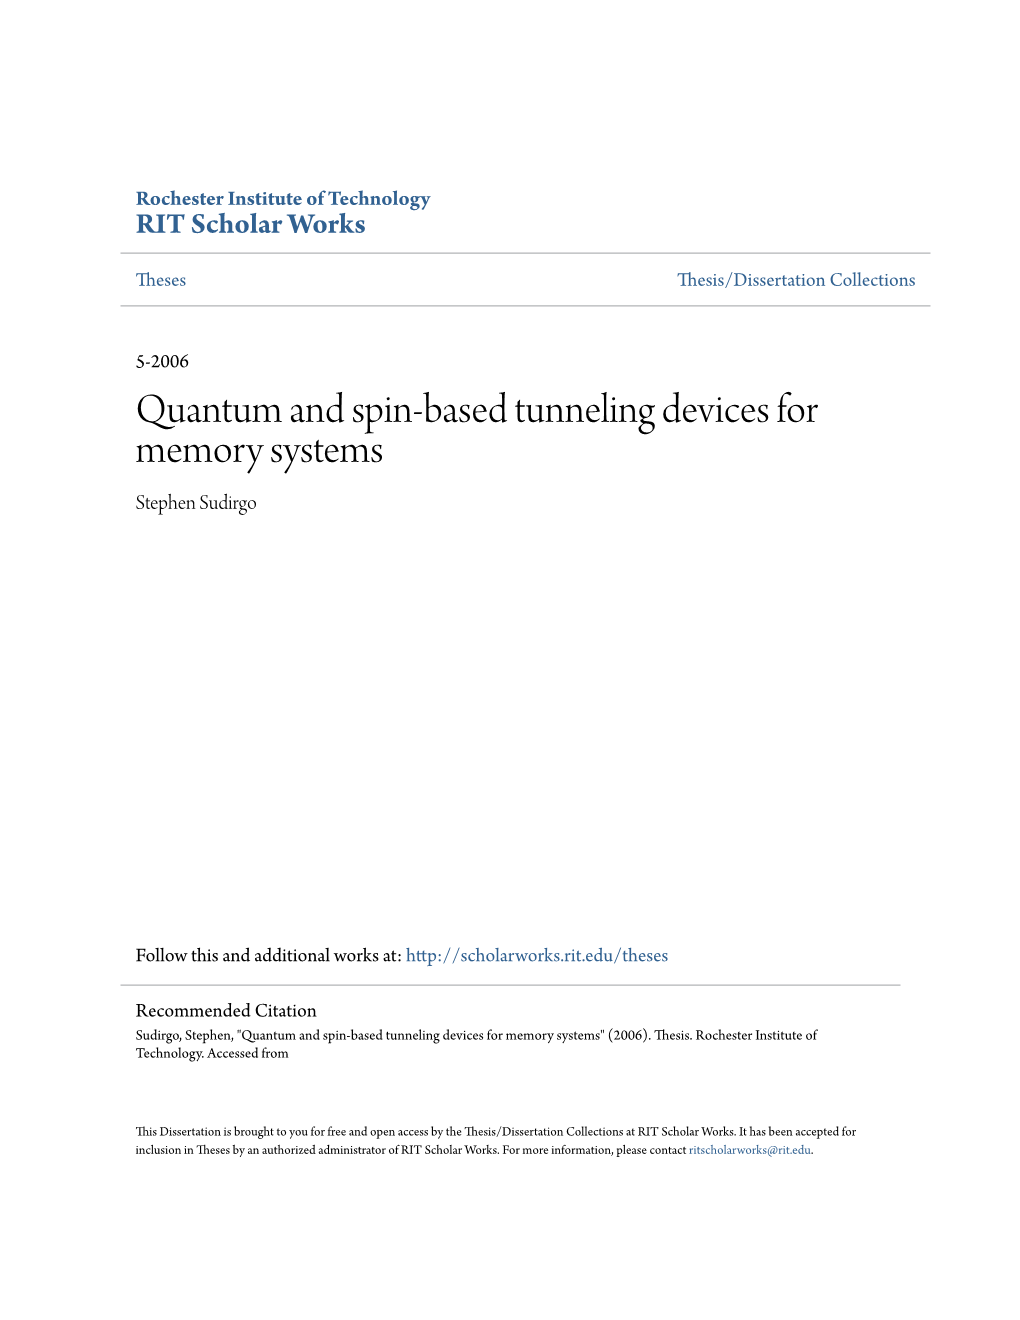 Quantum and Spin-Based Tunneling Devices for Memory Systems Stephen Sudirgo